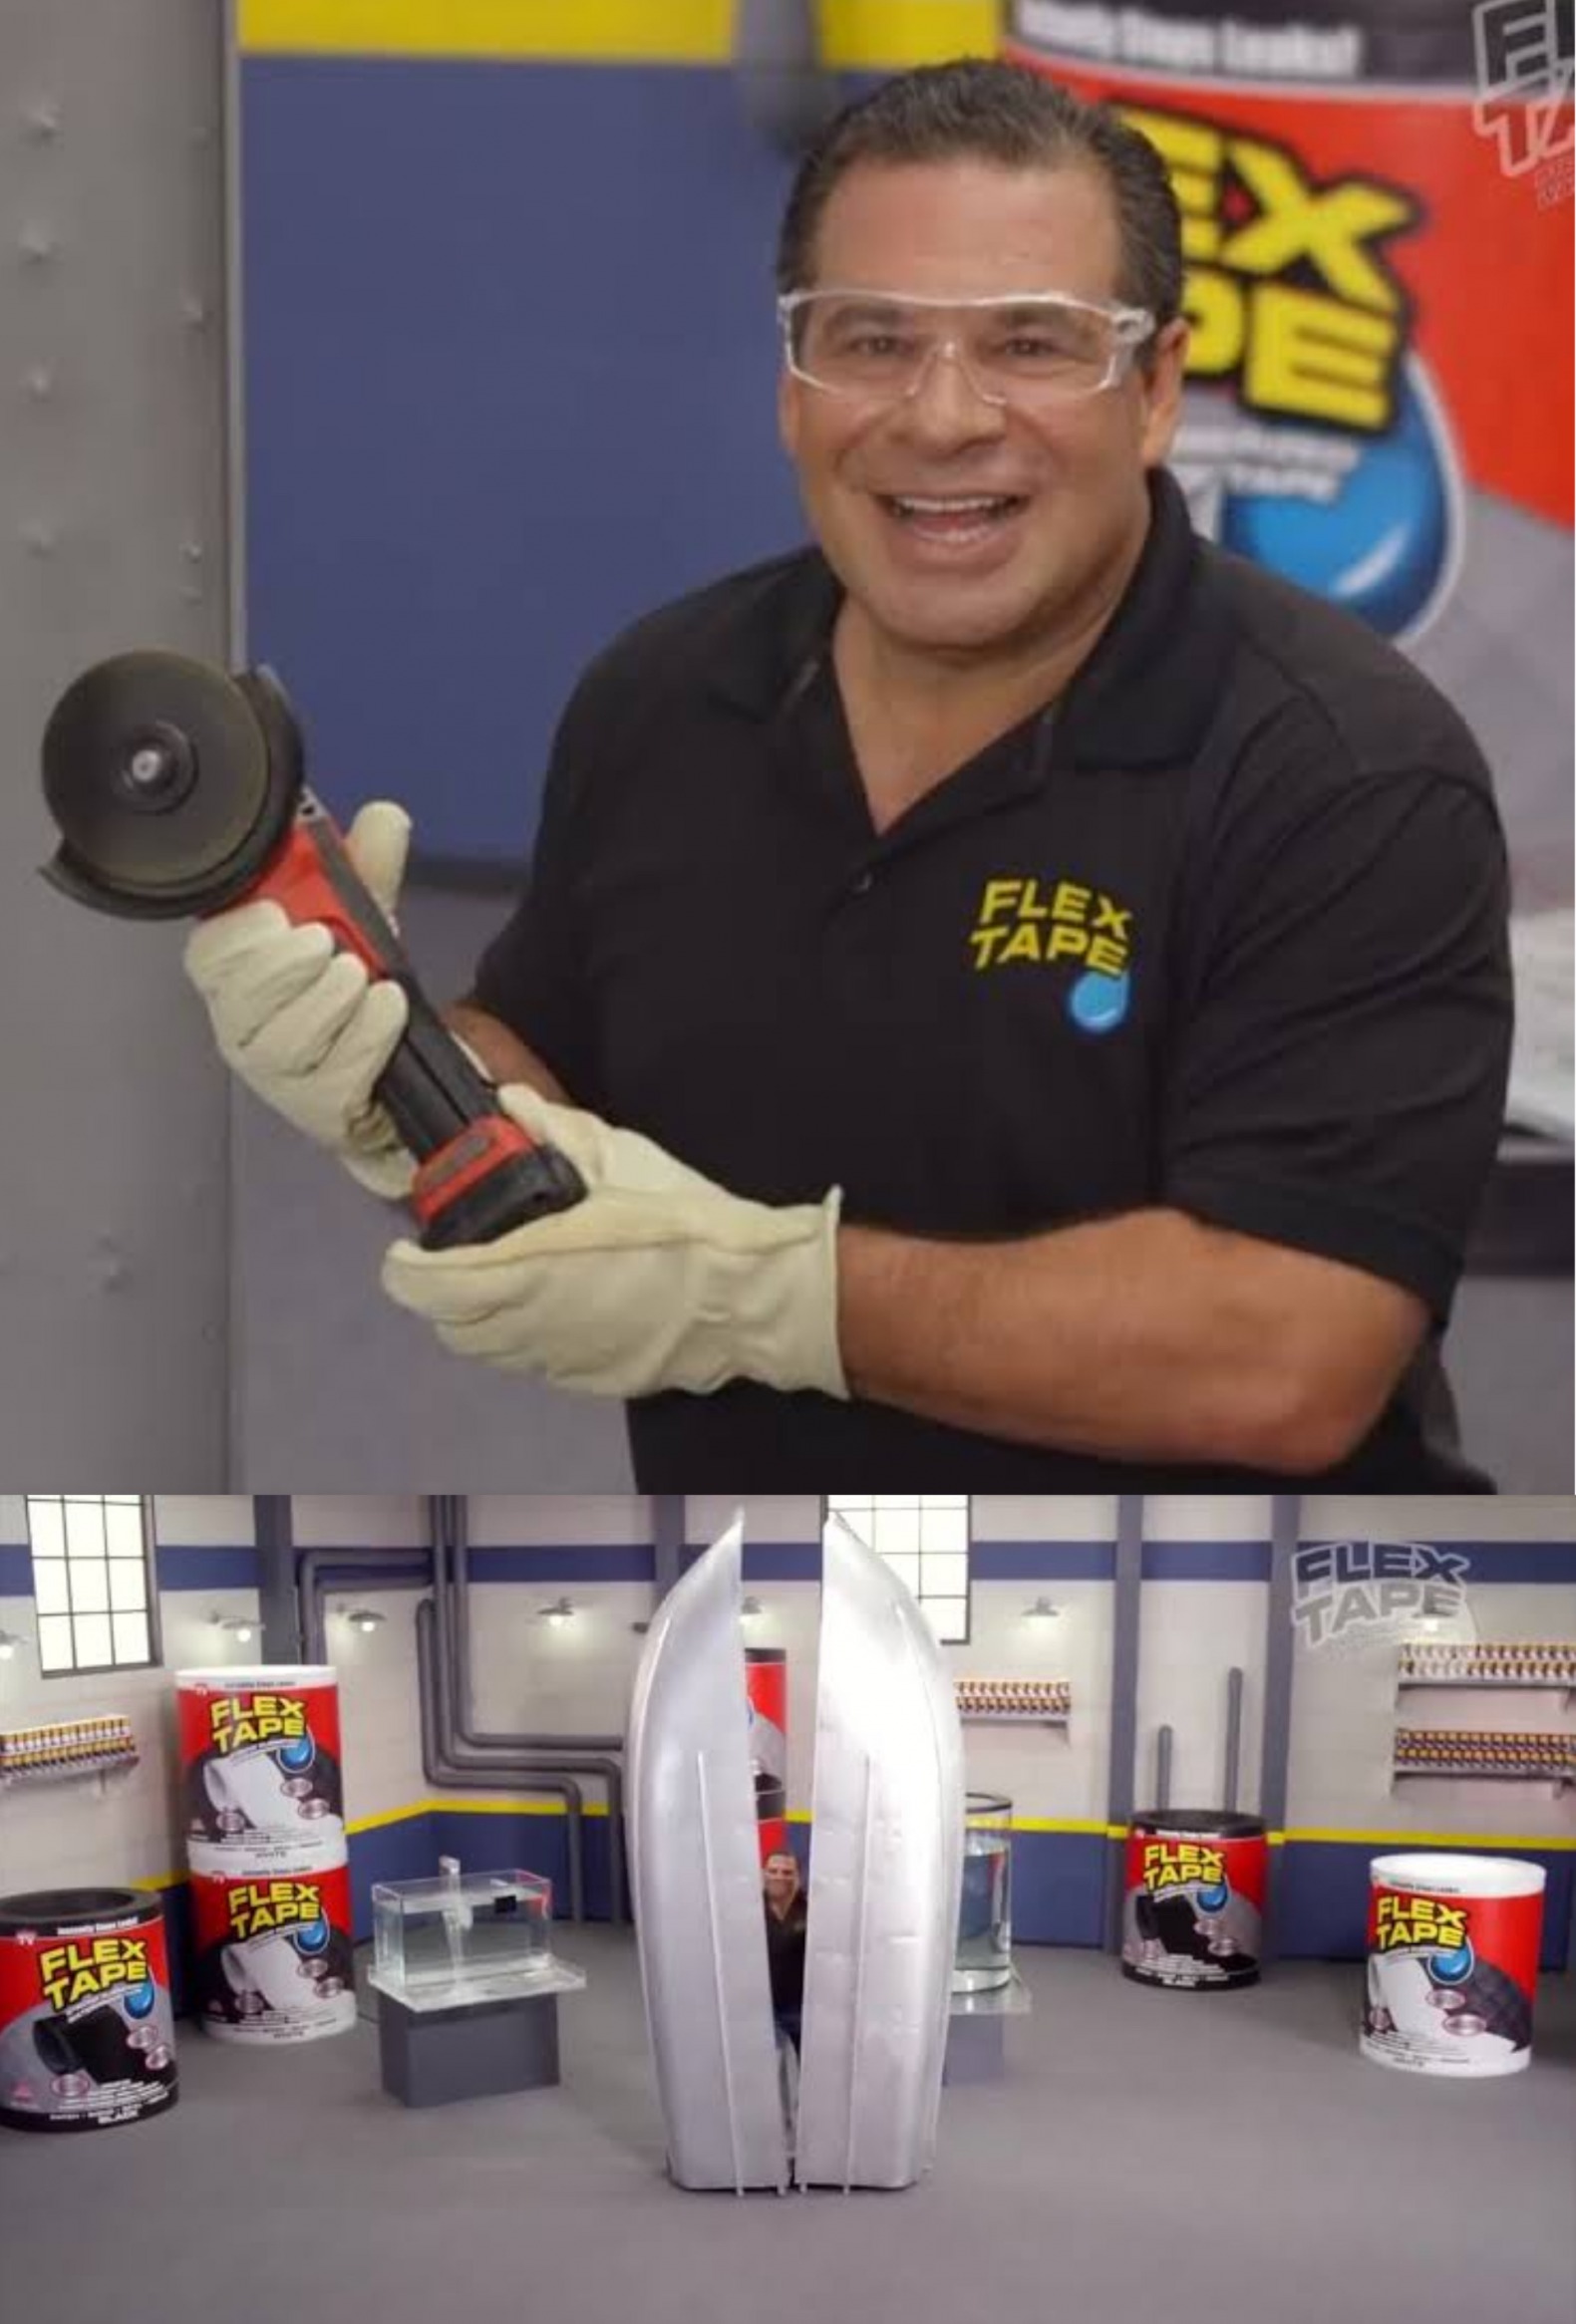 To show you the power of this flex tape, I sawed this boat Blank Meme Template